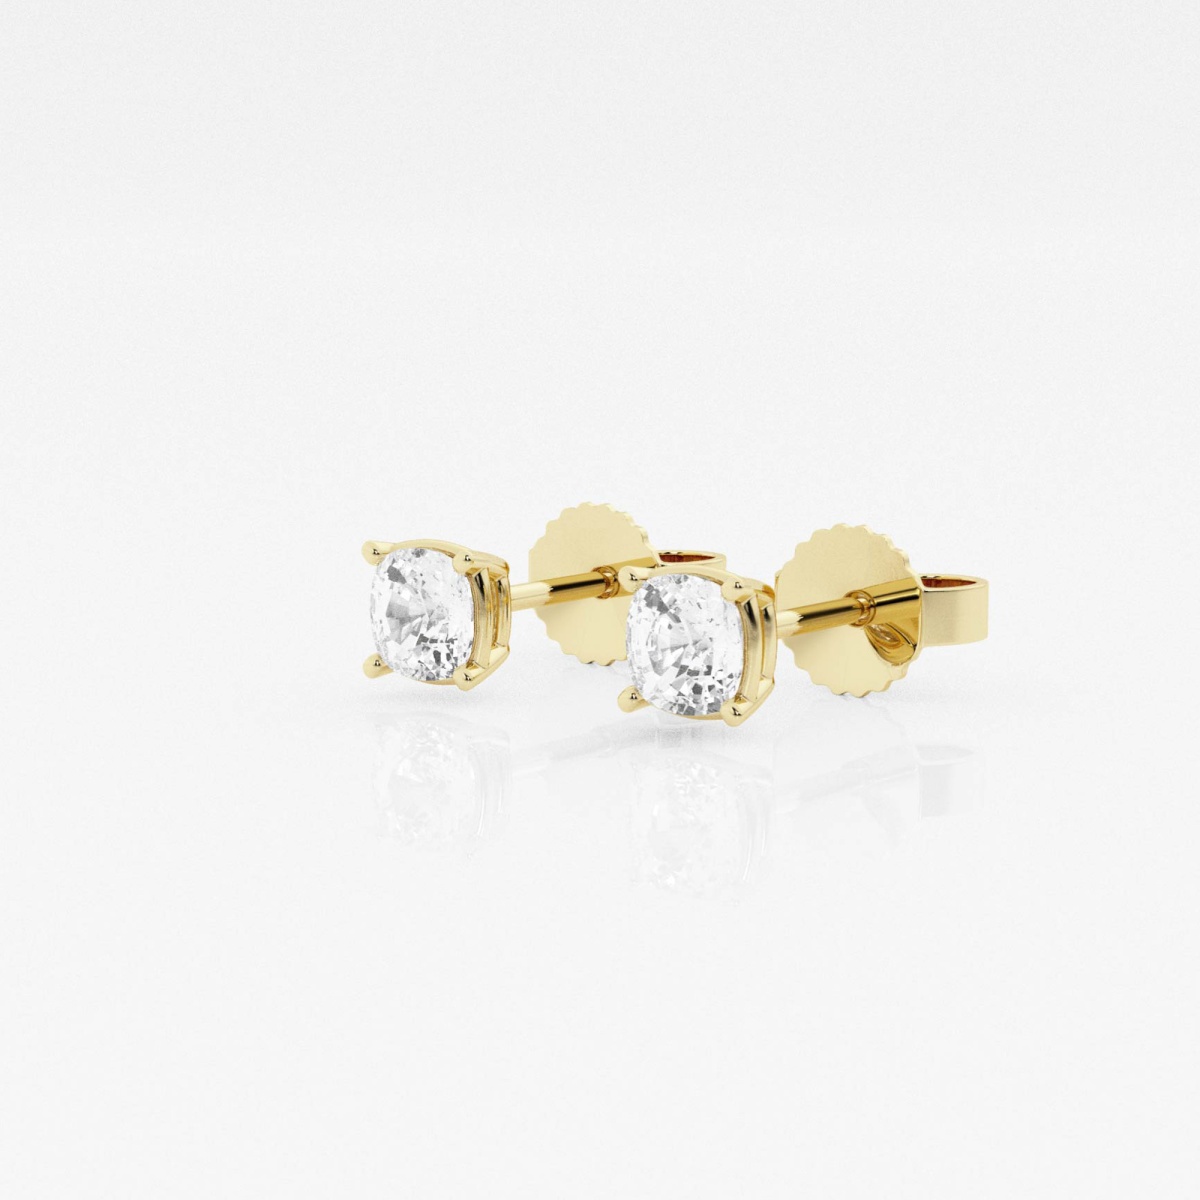 Additional Image 1 for  1/2 ctw Cushion Lab Grown Diamond Solitaire Stud Earrings